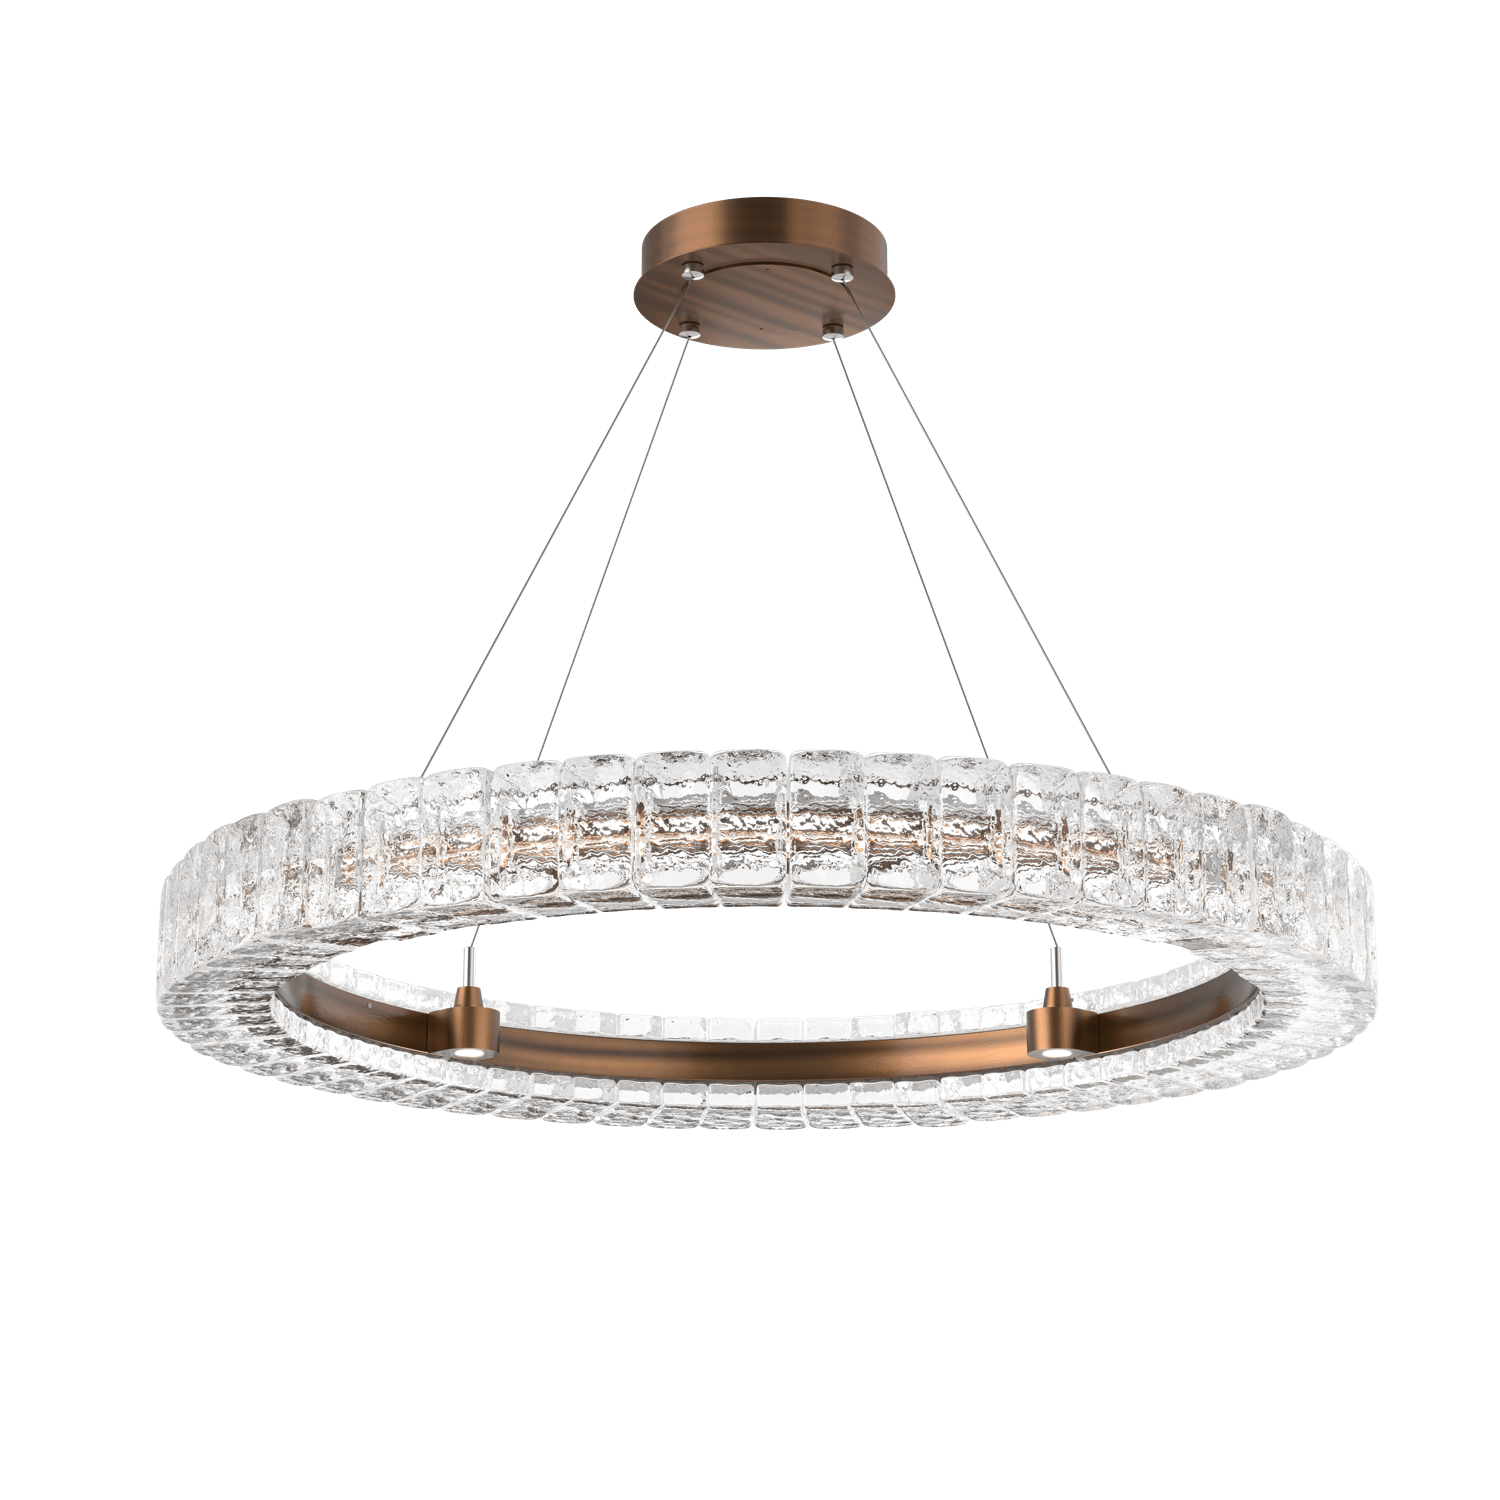 CHB0080-36-RB-Hammerton-Studio-Asscher-36-inch-ring-chandelier-with-oil-rubbed-bronze-finish-and-clear-cast-glass-shades-and-LED-lamping